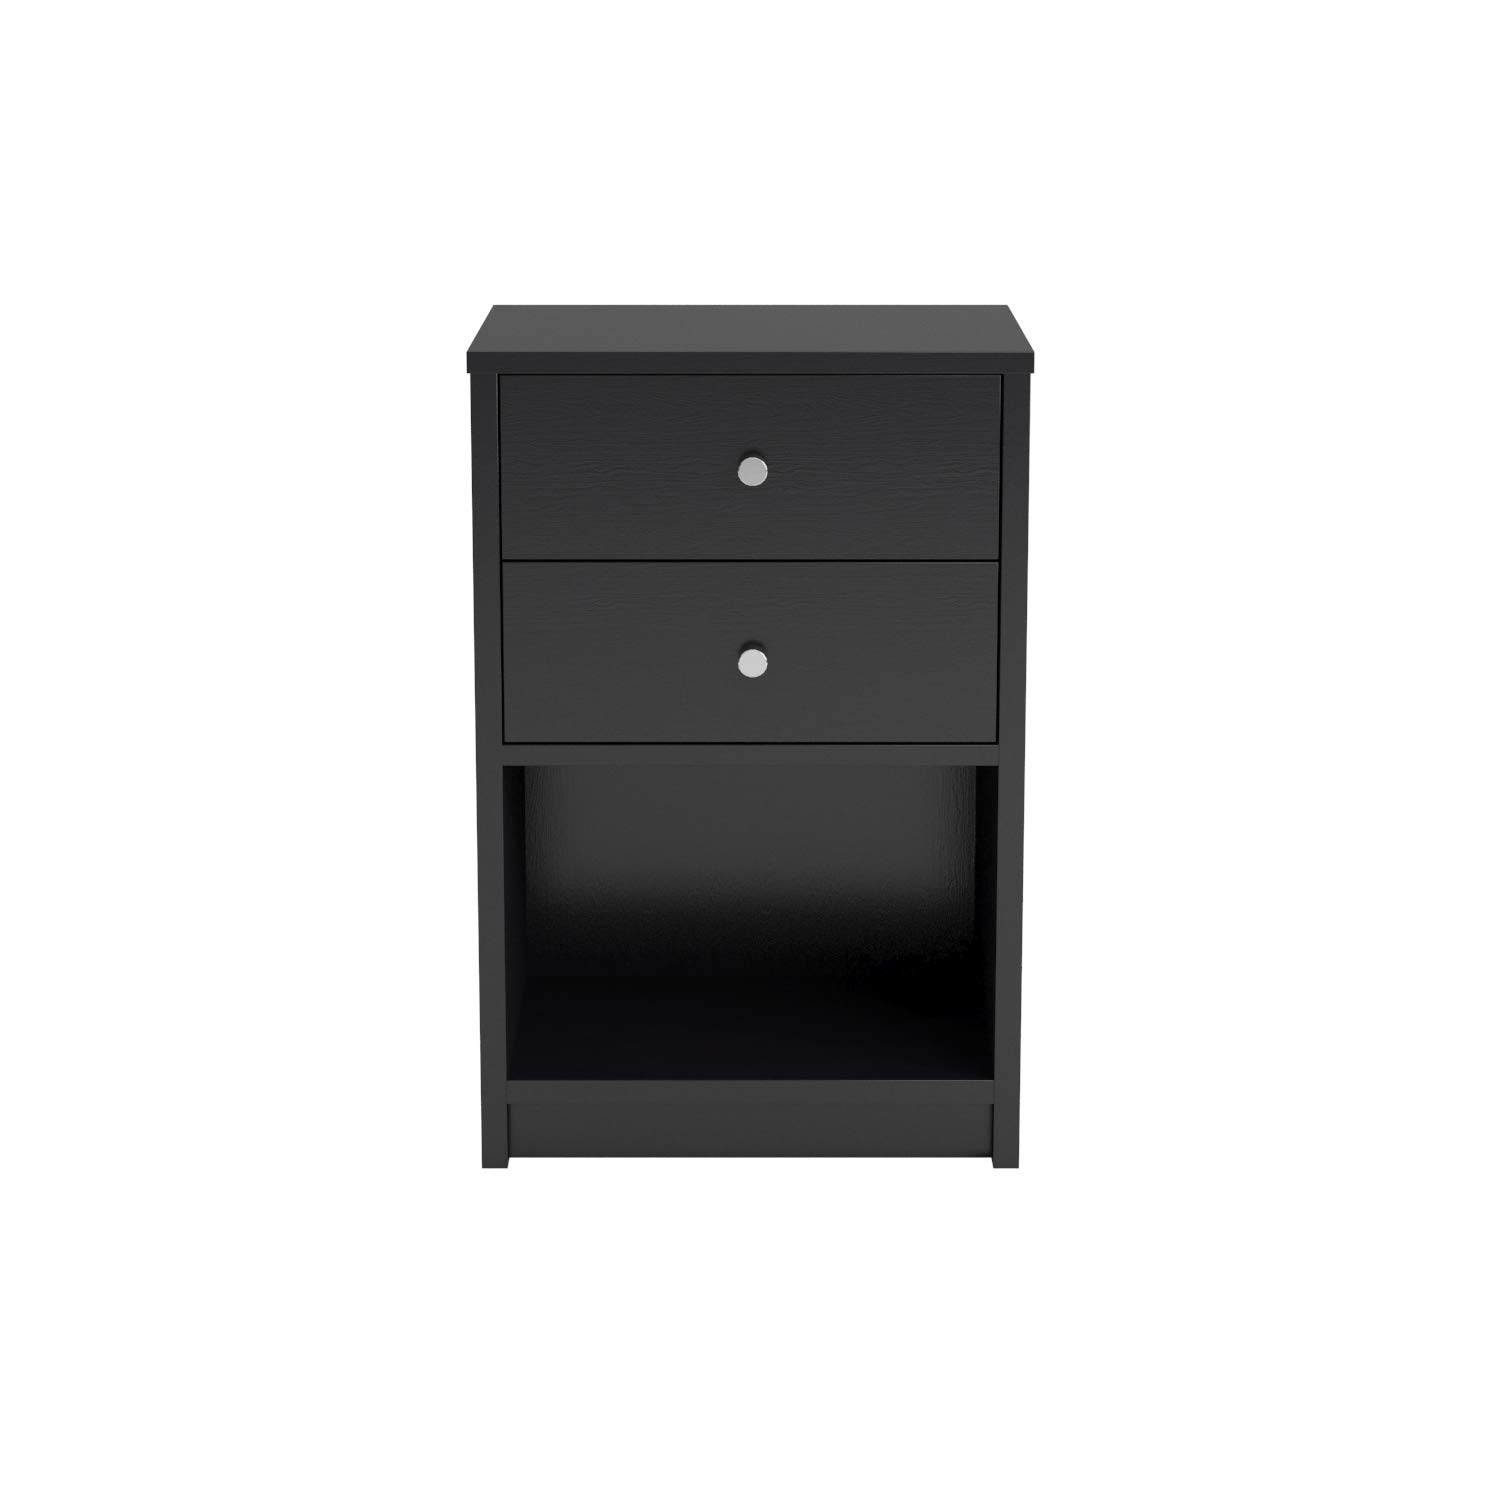 winsome ava accent table with drawer black finish overall size inch width depth height clearance couches small console cool bedside tables barn door window shutters patio